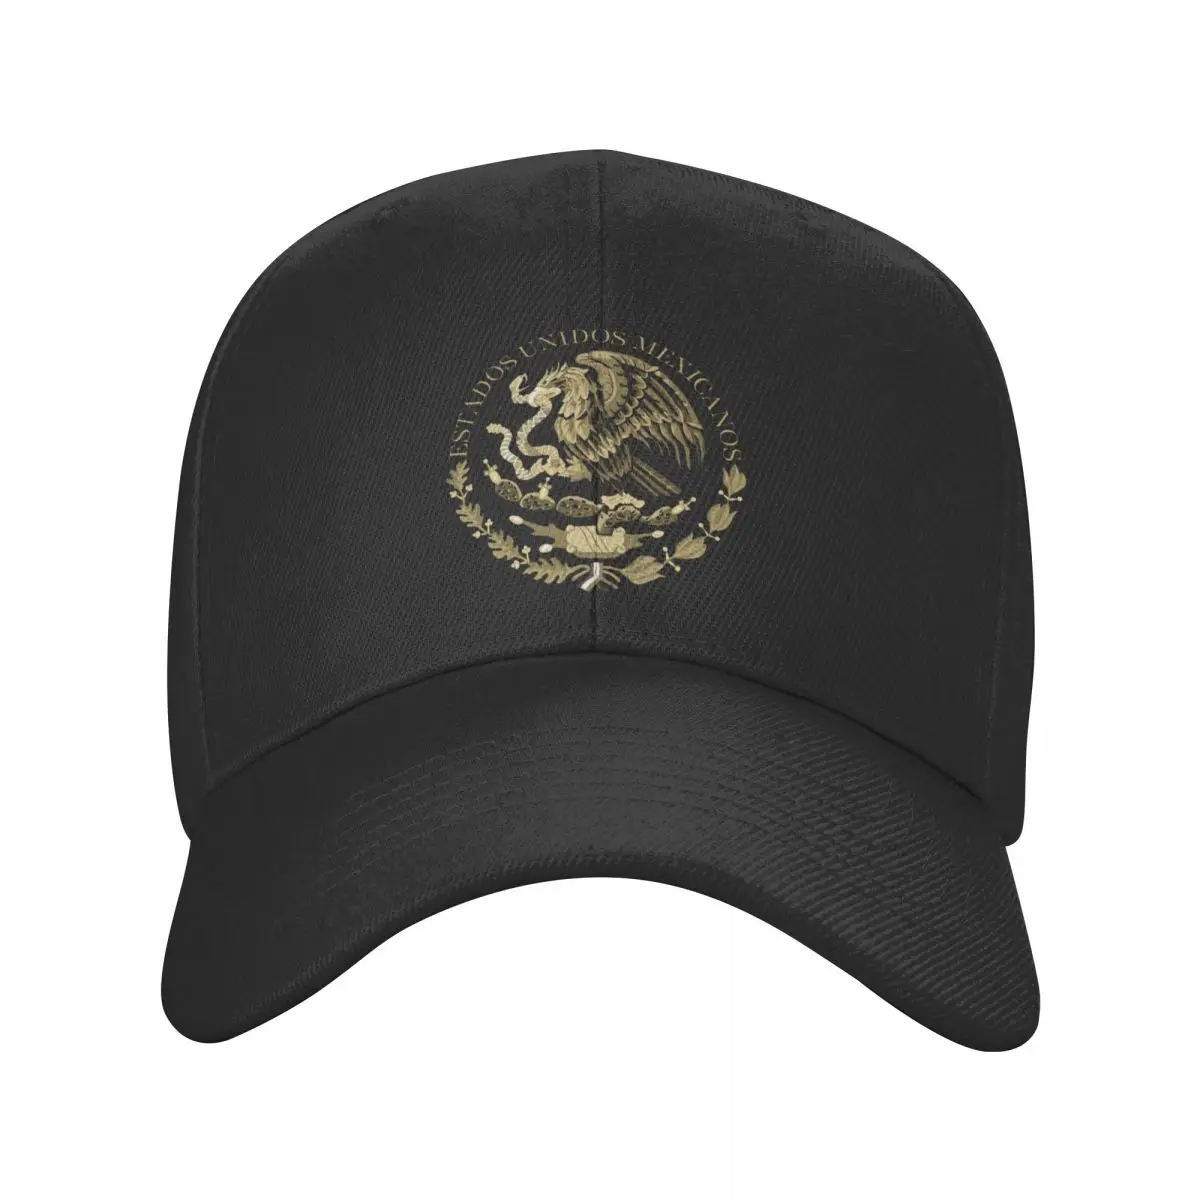 

New Classic Coat Of Arms cool Mexico Baseball Cap Women Men Custom Adjustable Adult Mexican Flag Seal In Sepia Dad Hat Outdoor